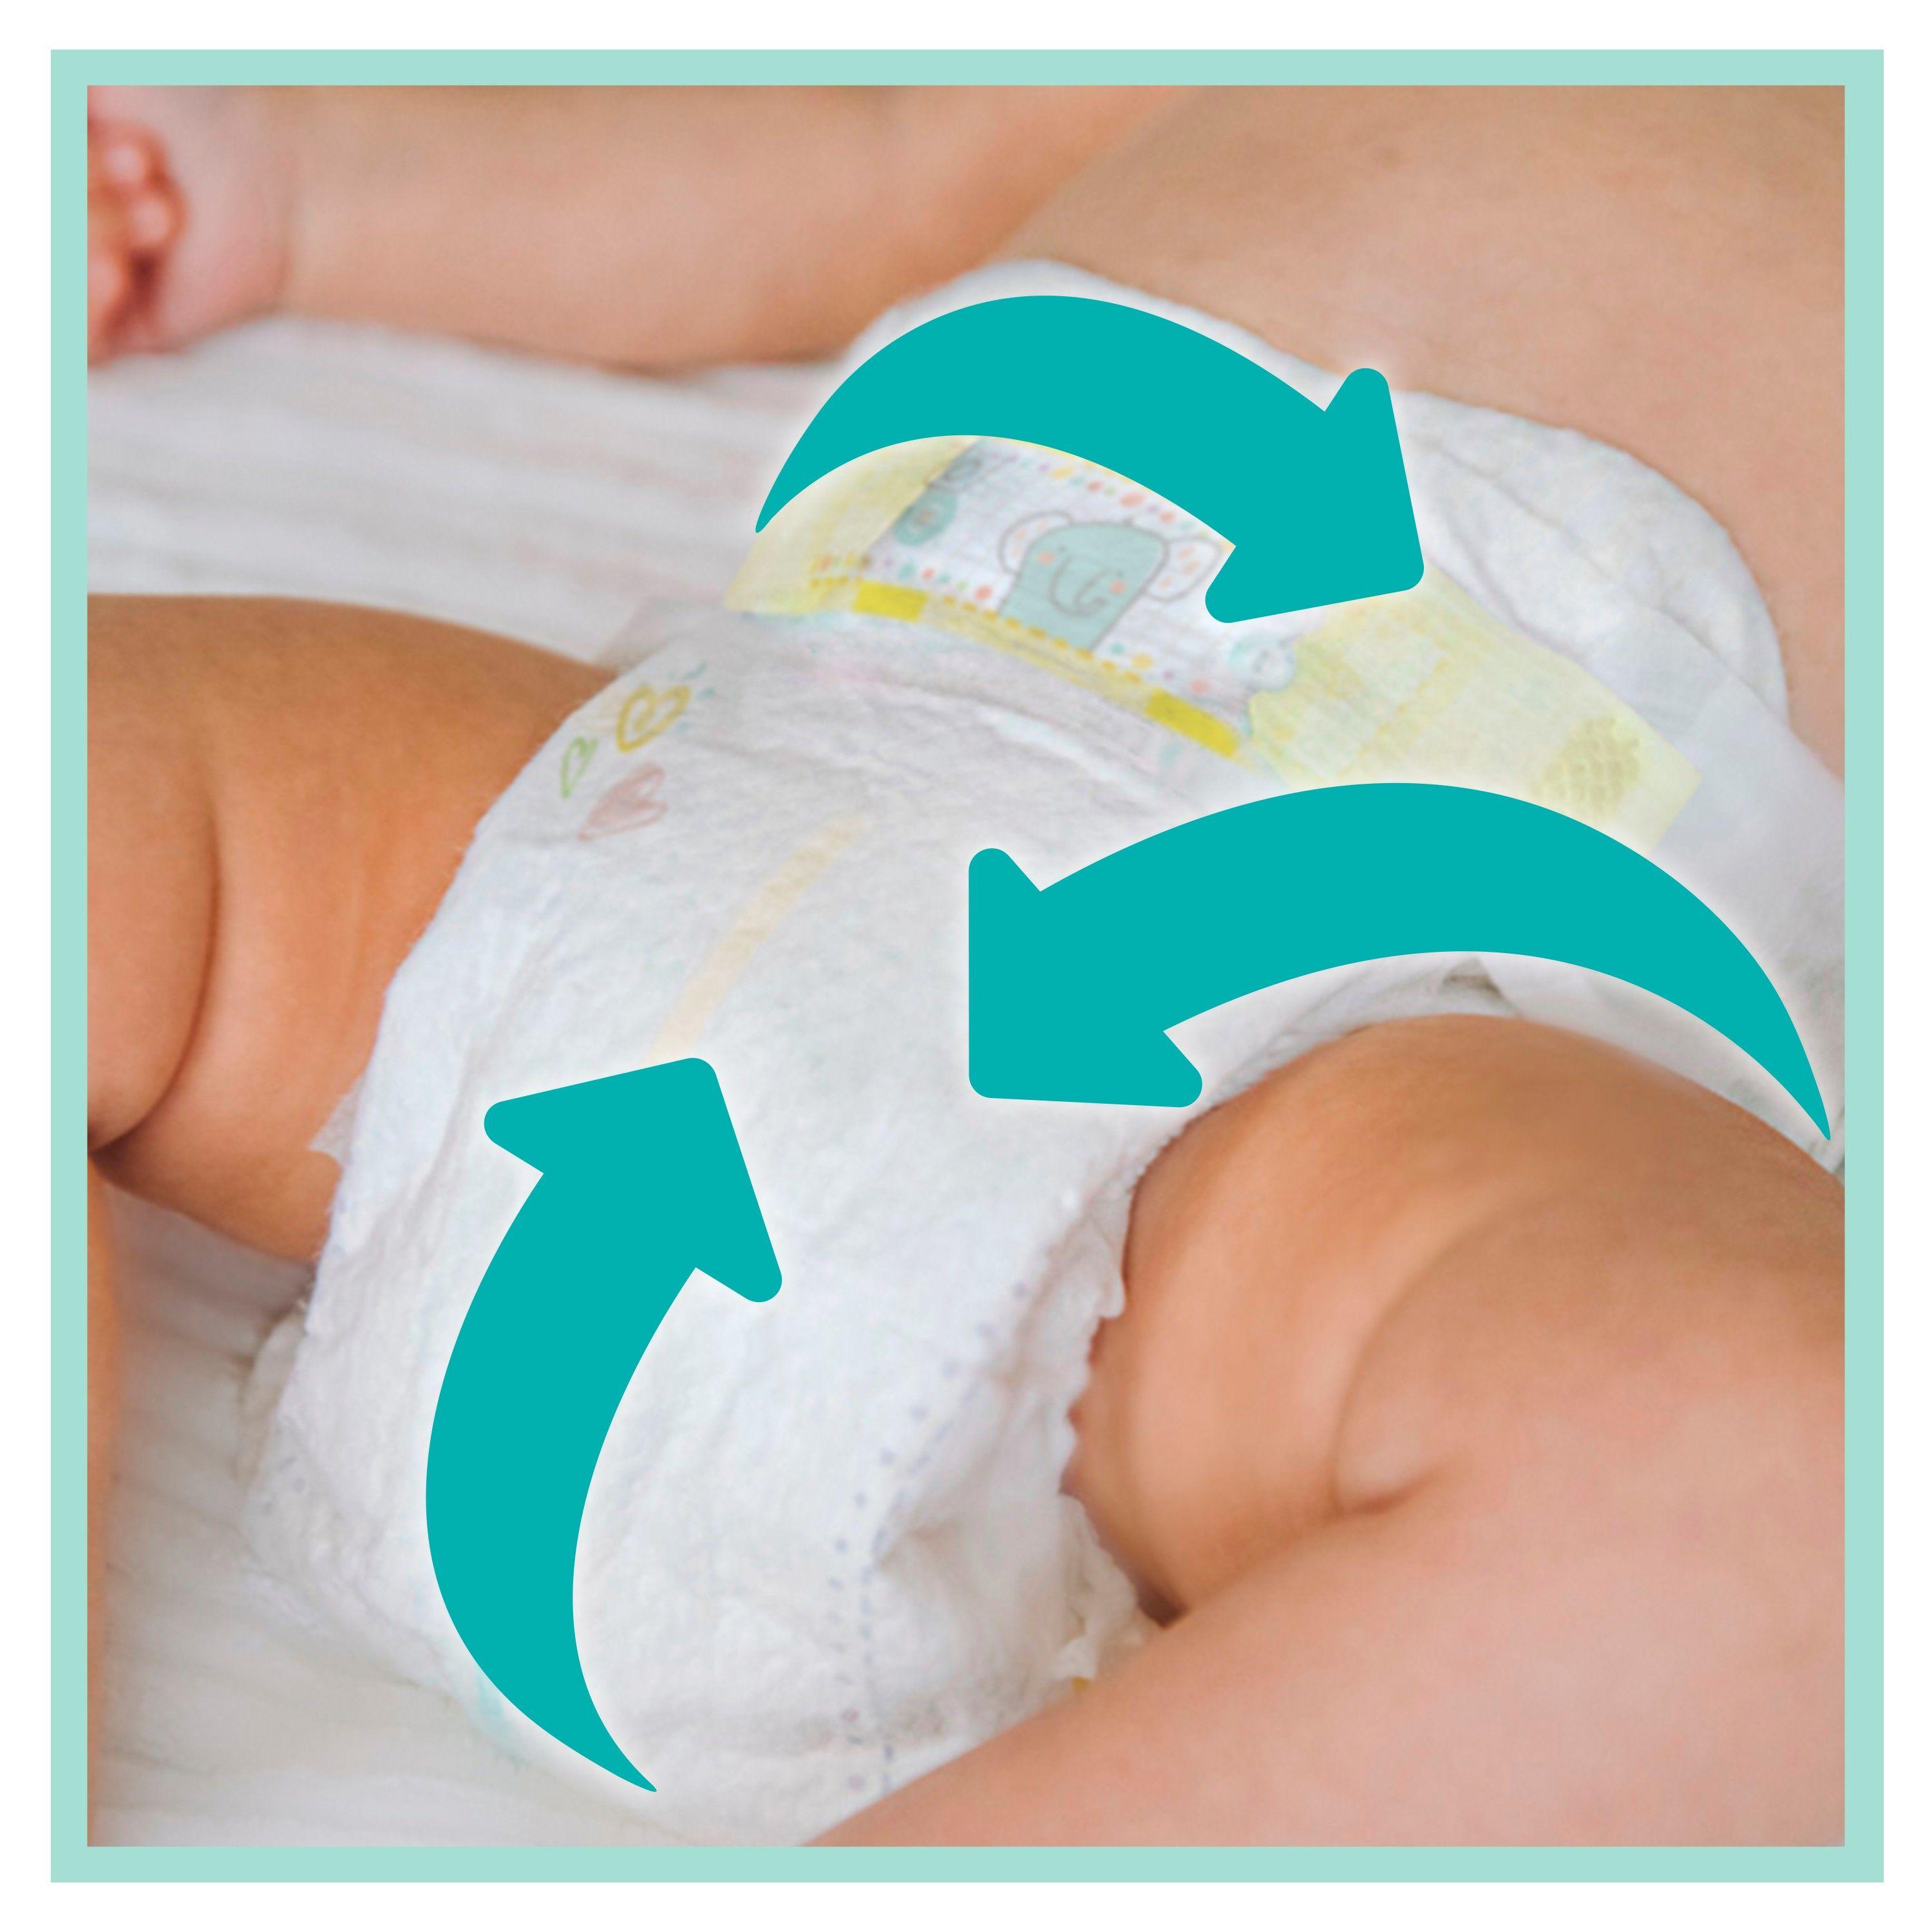 Pampers Premium Protection Size 5, Nappy x136, 11kg-16kg